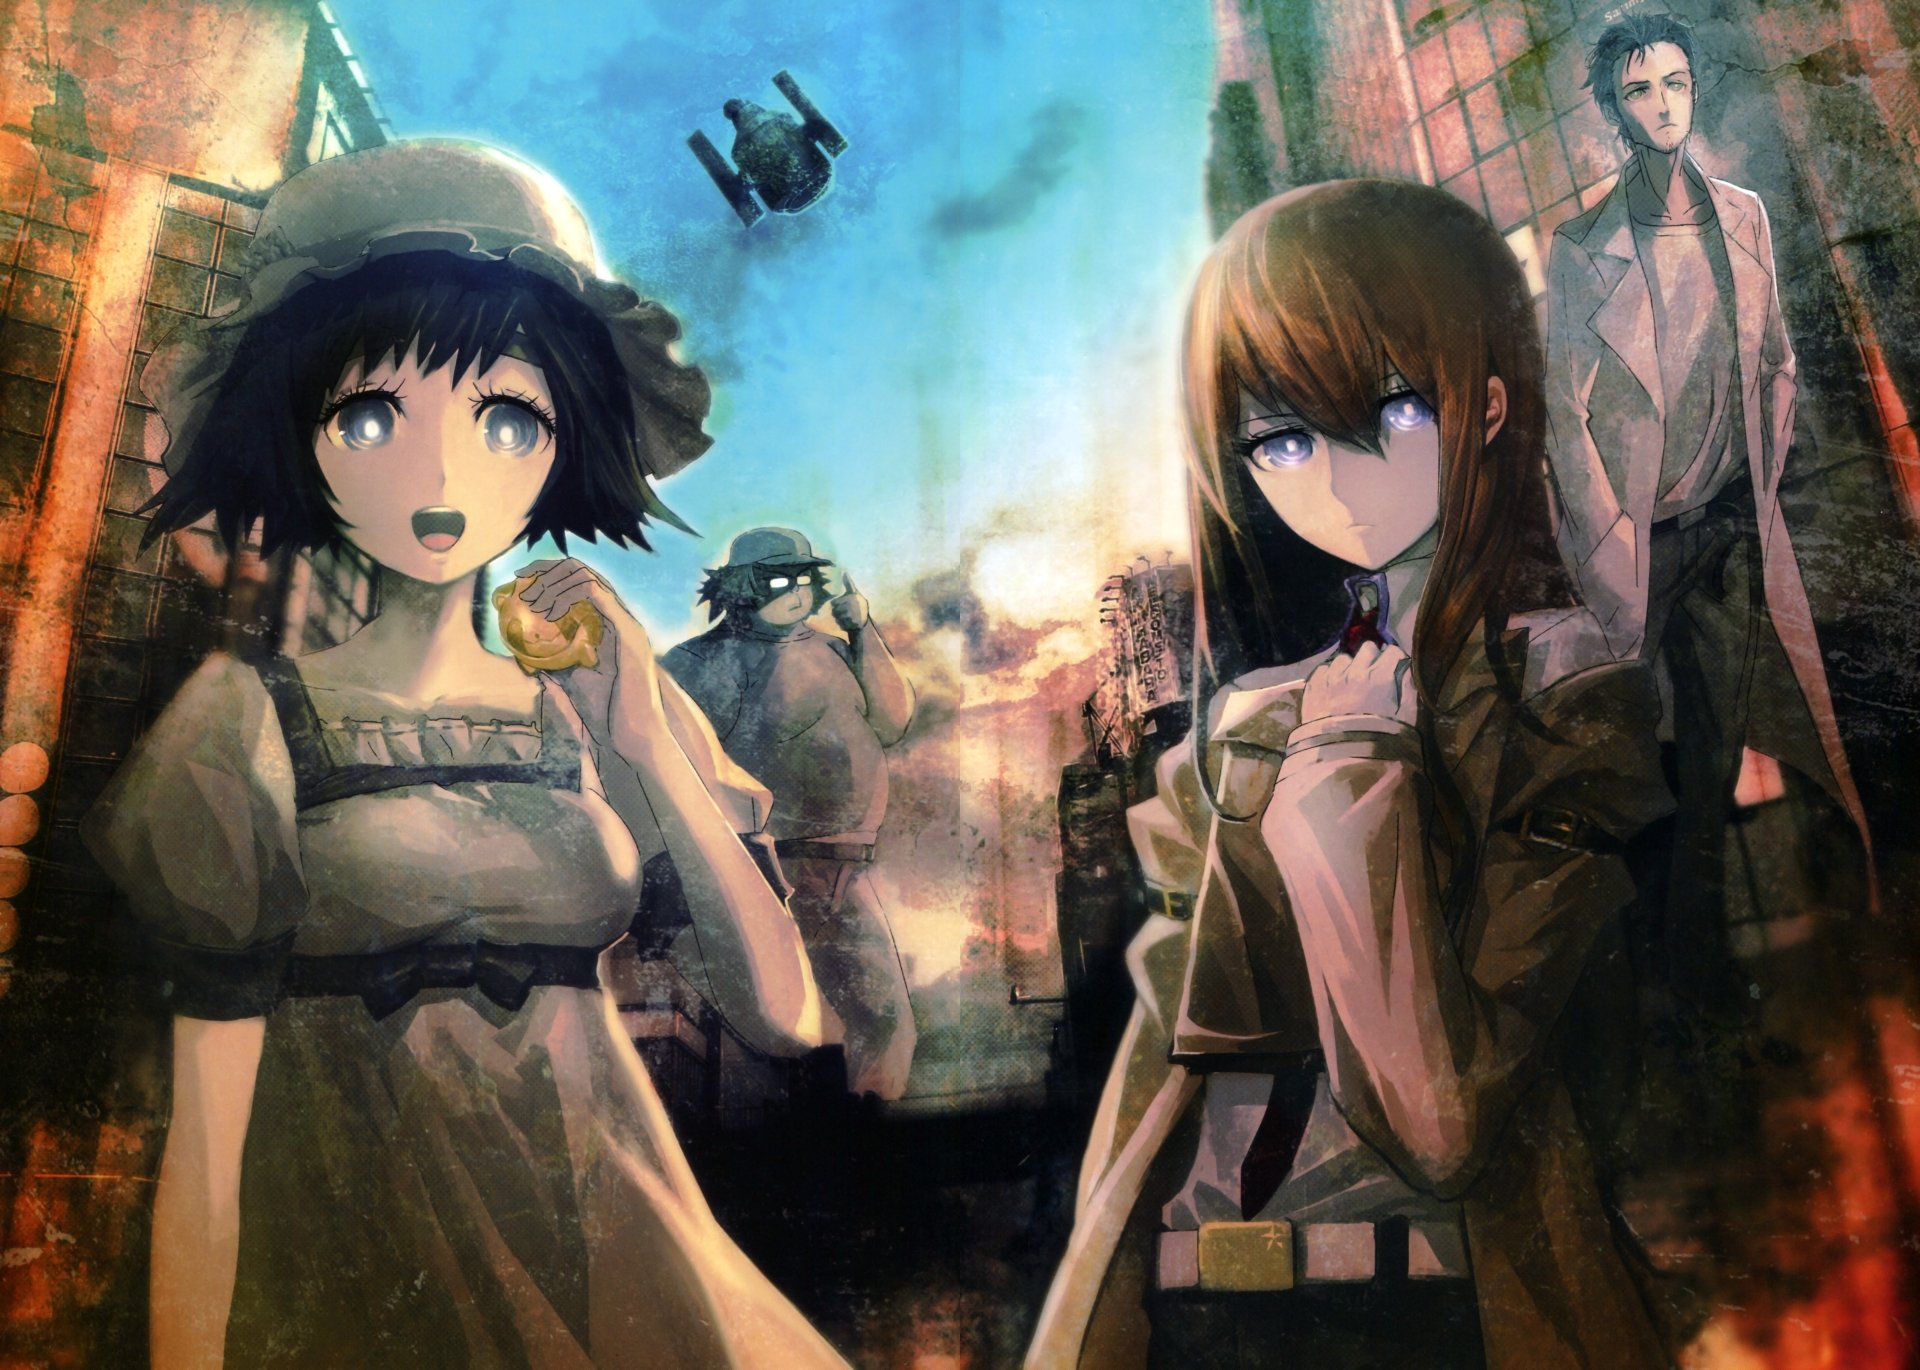 1920x1370 60+ 4K Anime Steins;Gate Wallpapers | Background Images